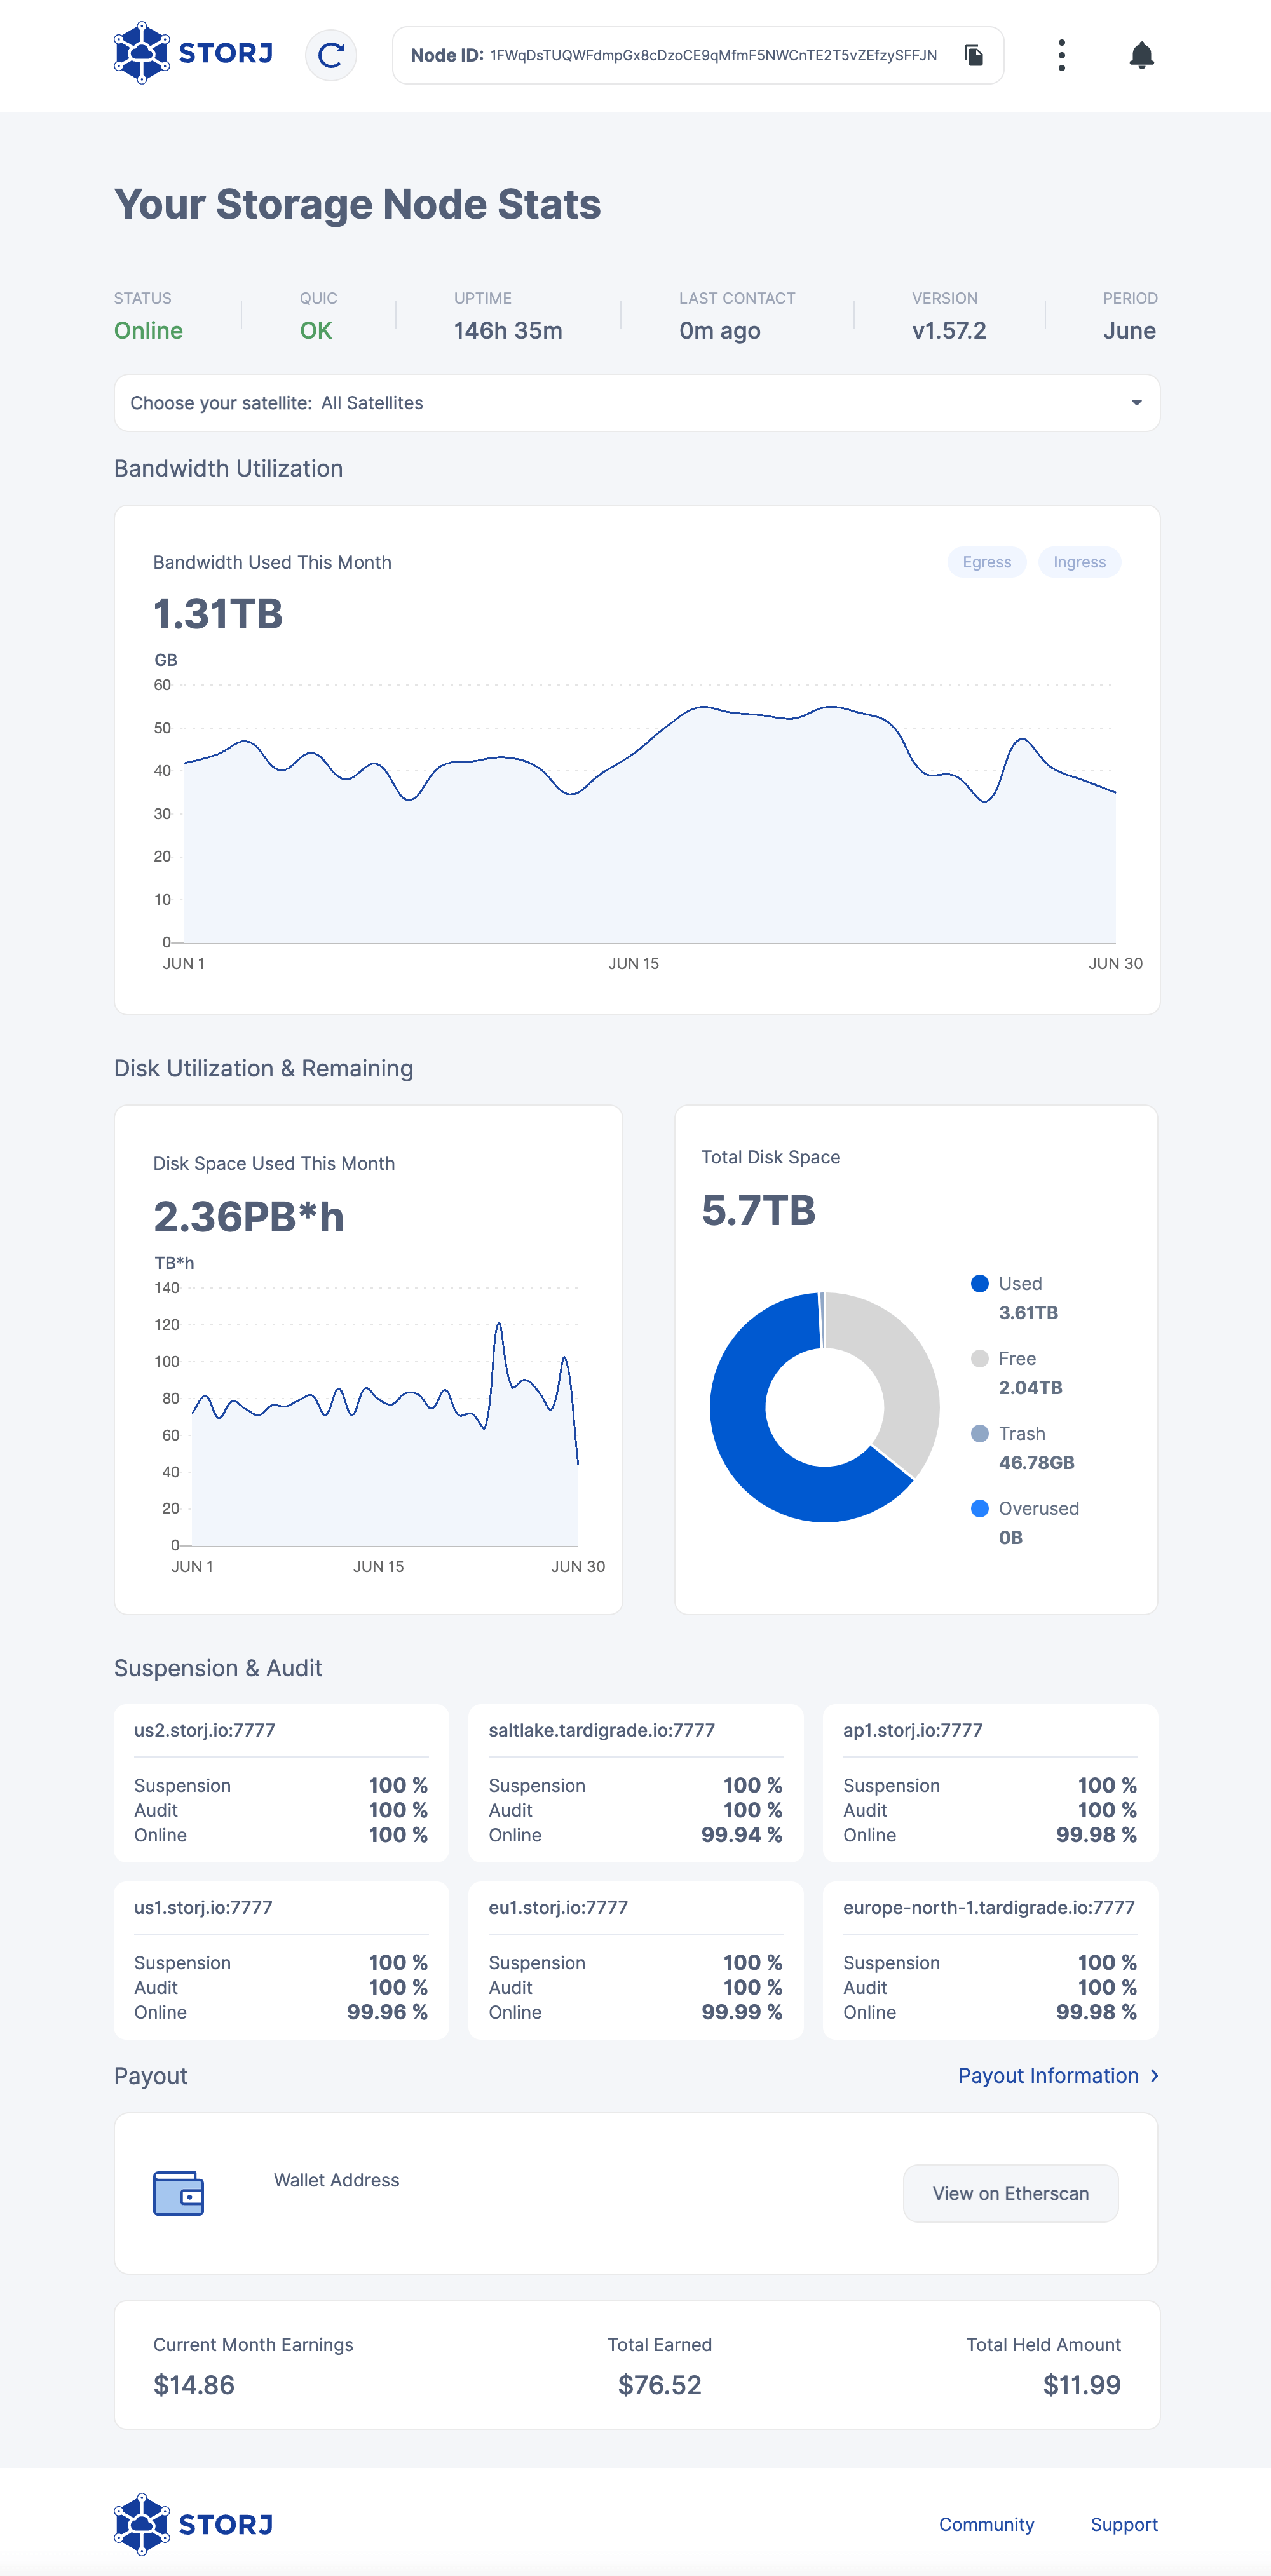 Storj Dashboard end of June 2022. Bandwidth used: 1.31 TB. Hours of storage used: 2.36 PB*h. Total available storage: 5.7 TB. Used storage: 3.61 TB. Free disk space: 2.04 TB. Recycle bin: 46.78 GB. Earnings this month: $14.86. Total earnings: $76.52. Withheld earnings: $11.99.